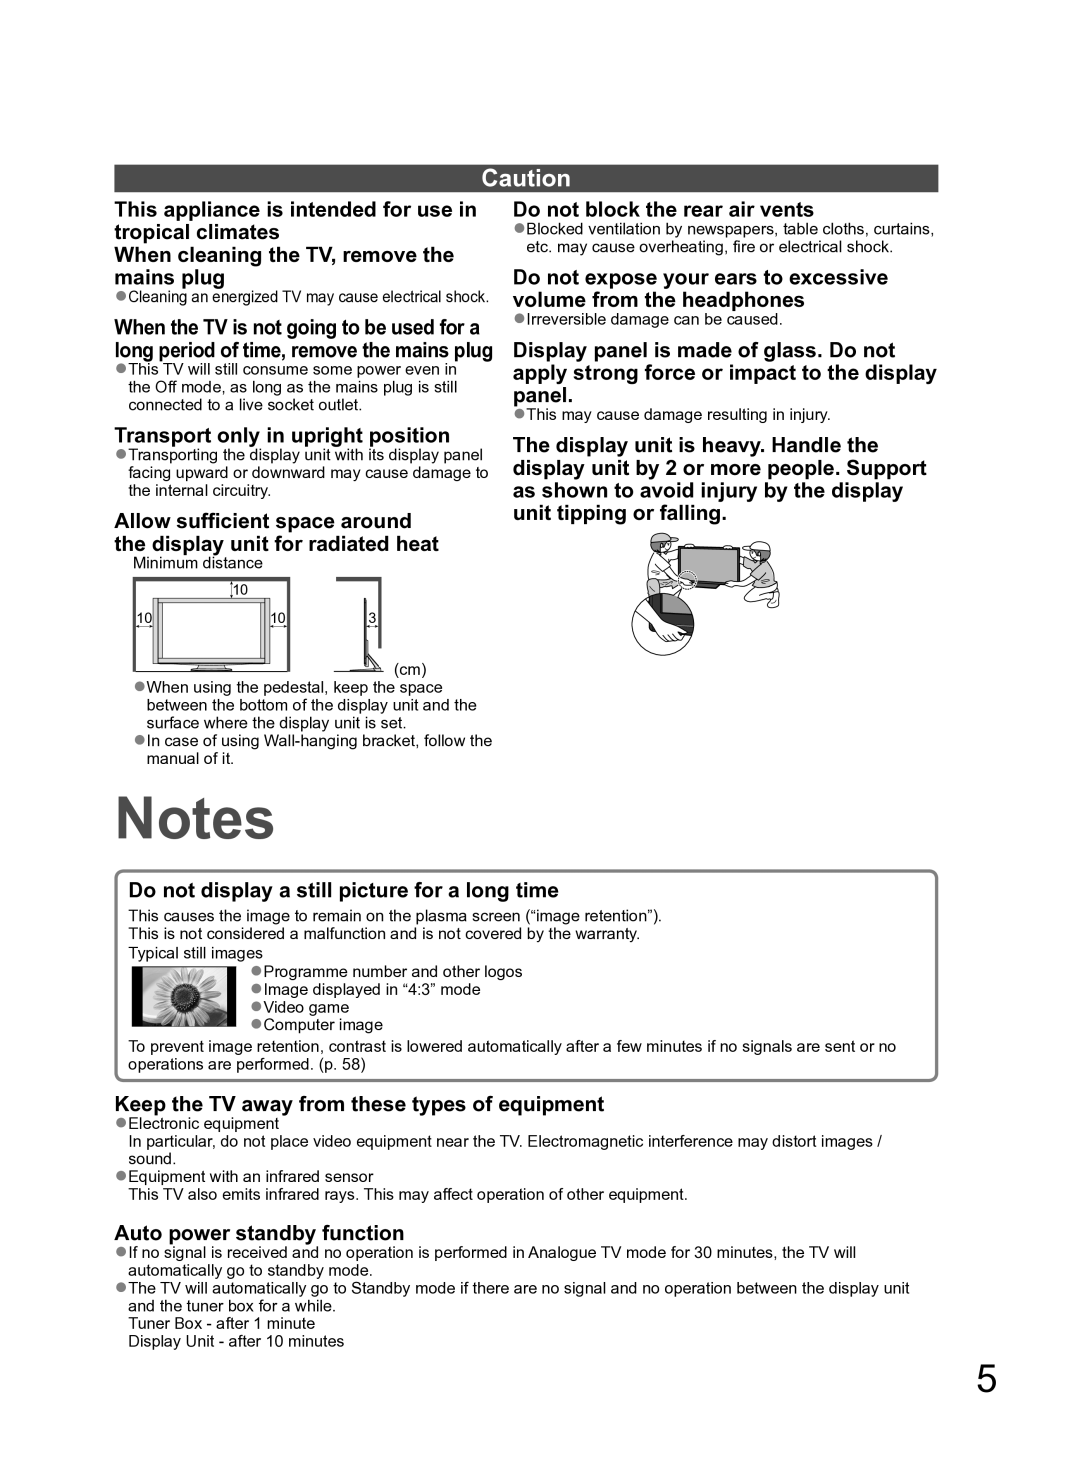 Panasonic TH-P54Z10H manual Cleaning an energized TV may cause electrical shock, Irreversible damage can be caused 